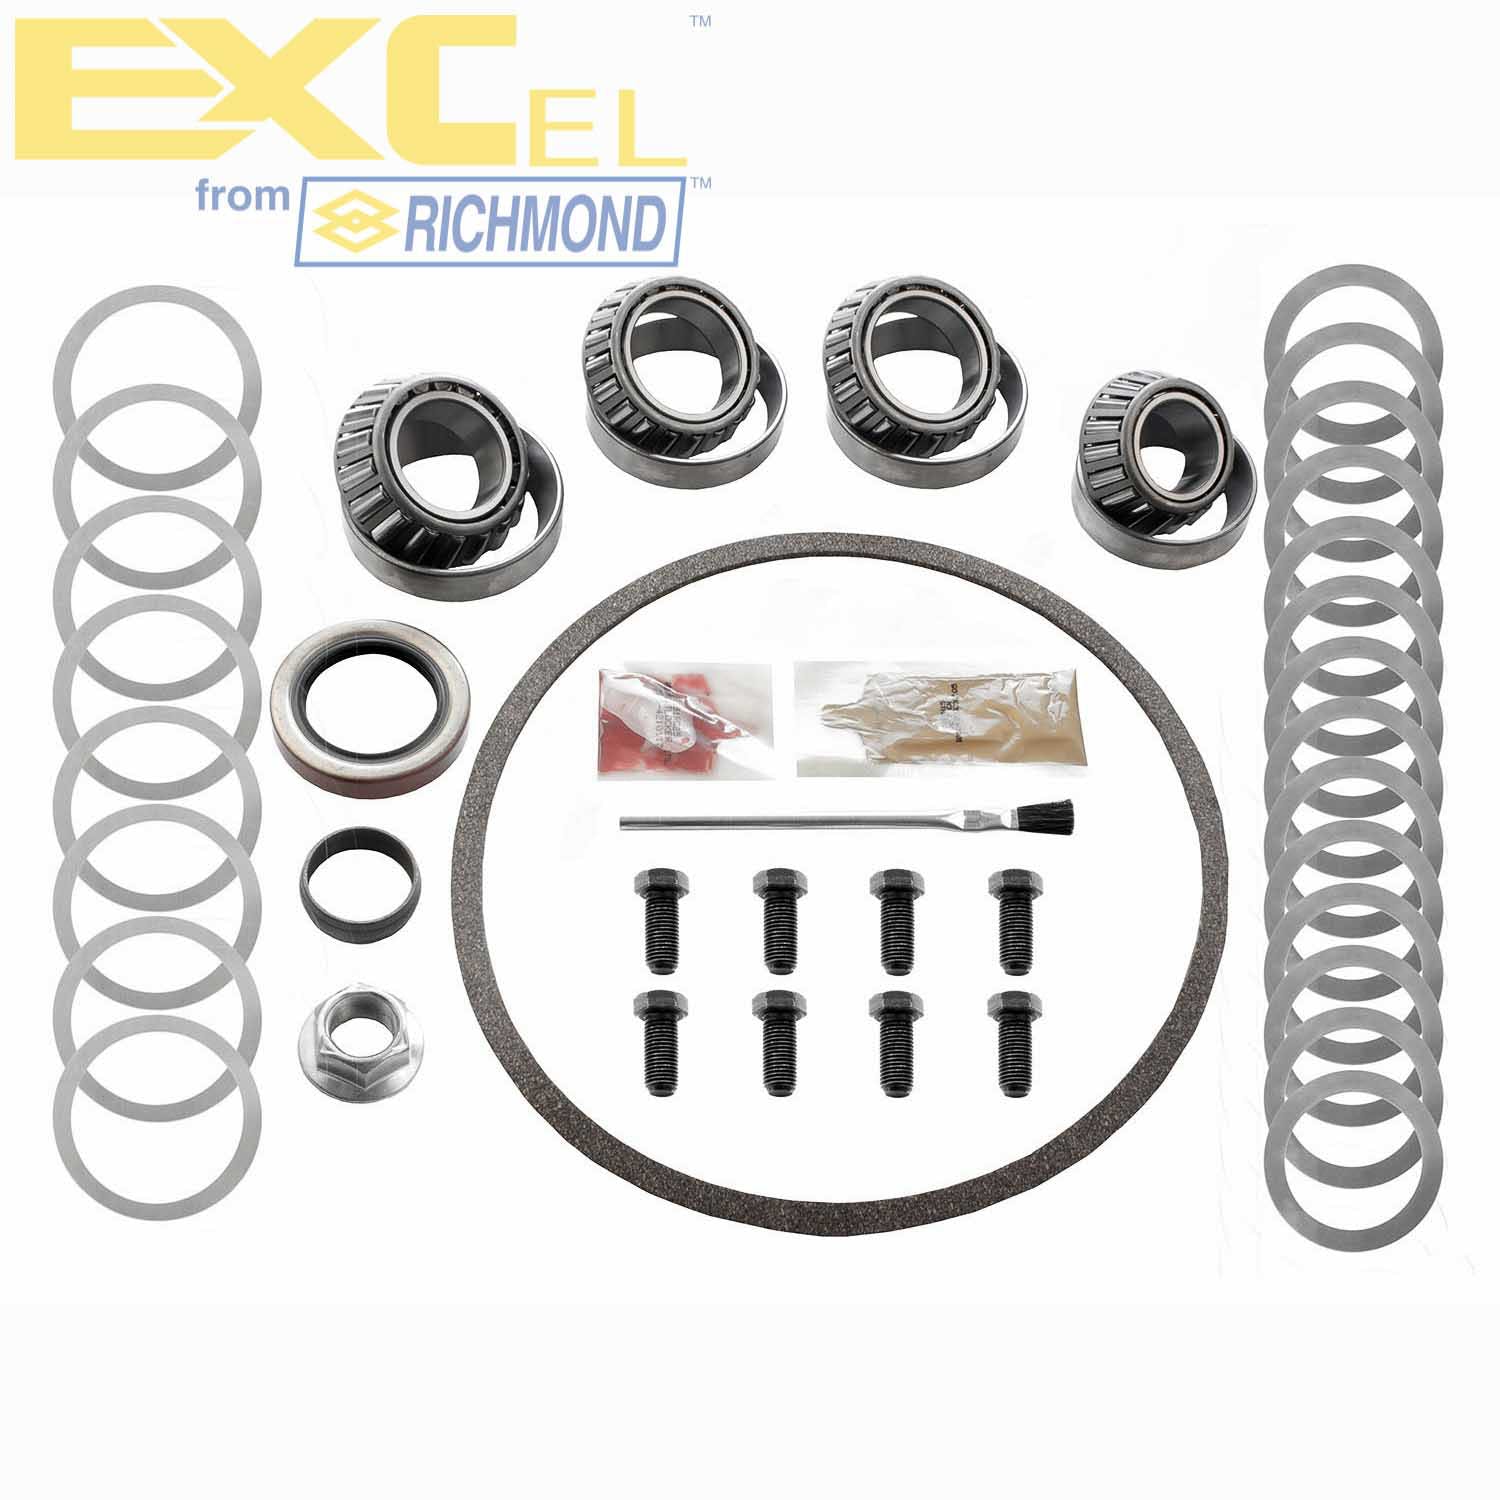 Excel XL-1054-1 Differential Bearing Kit